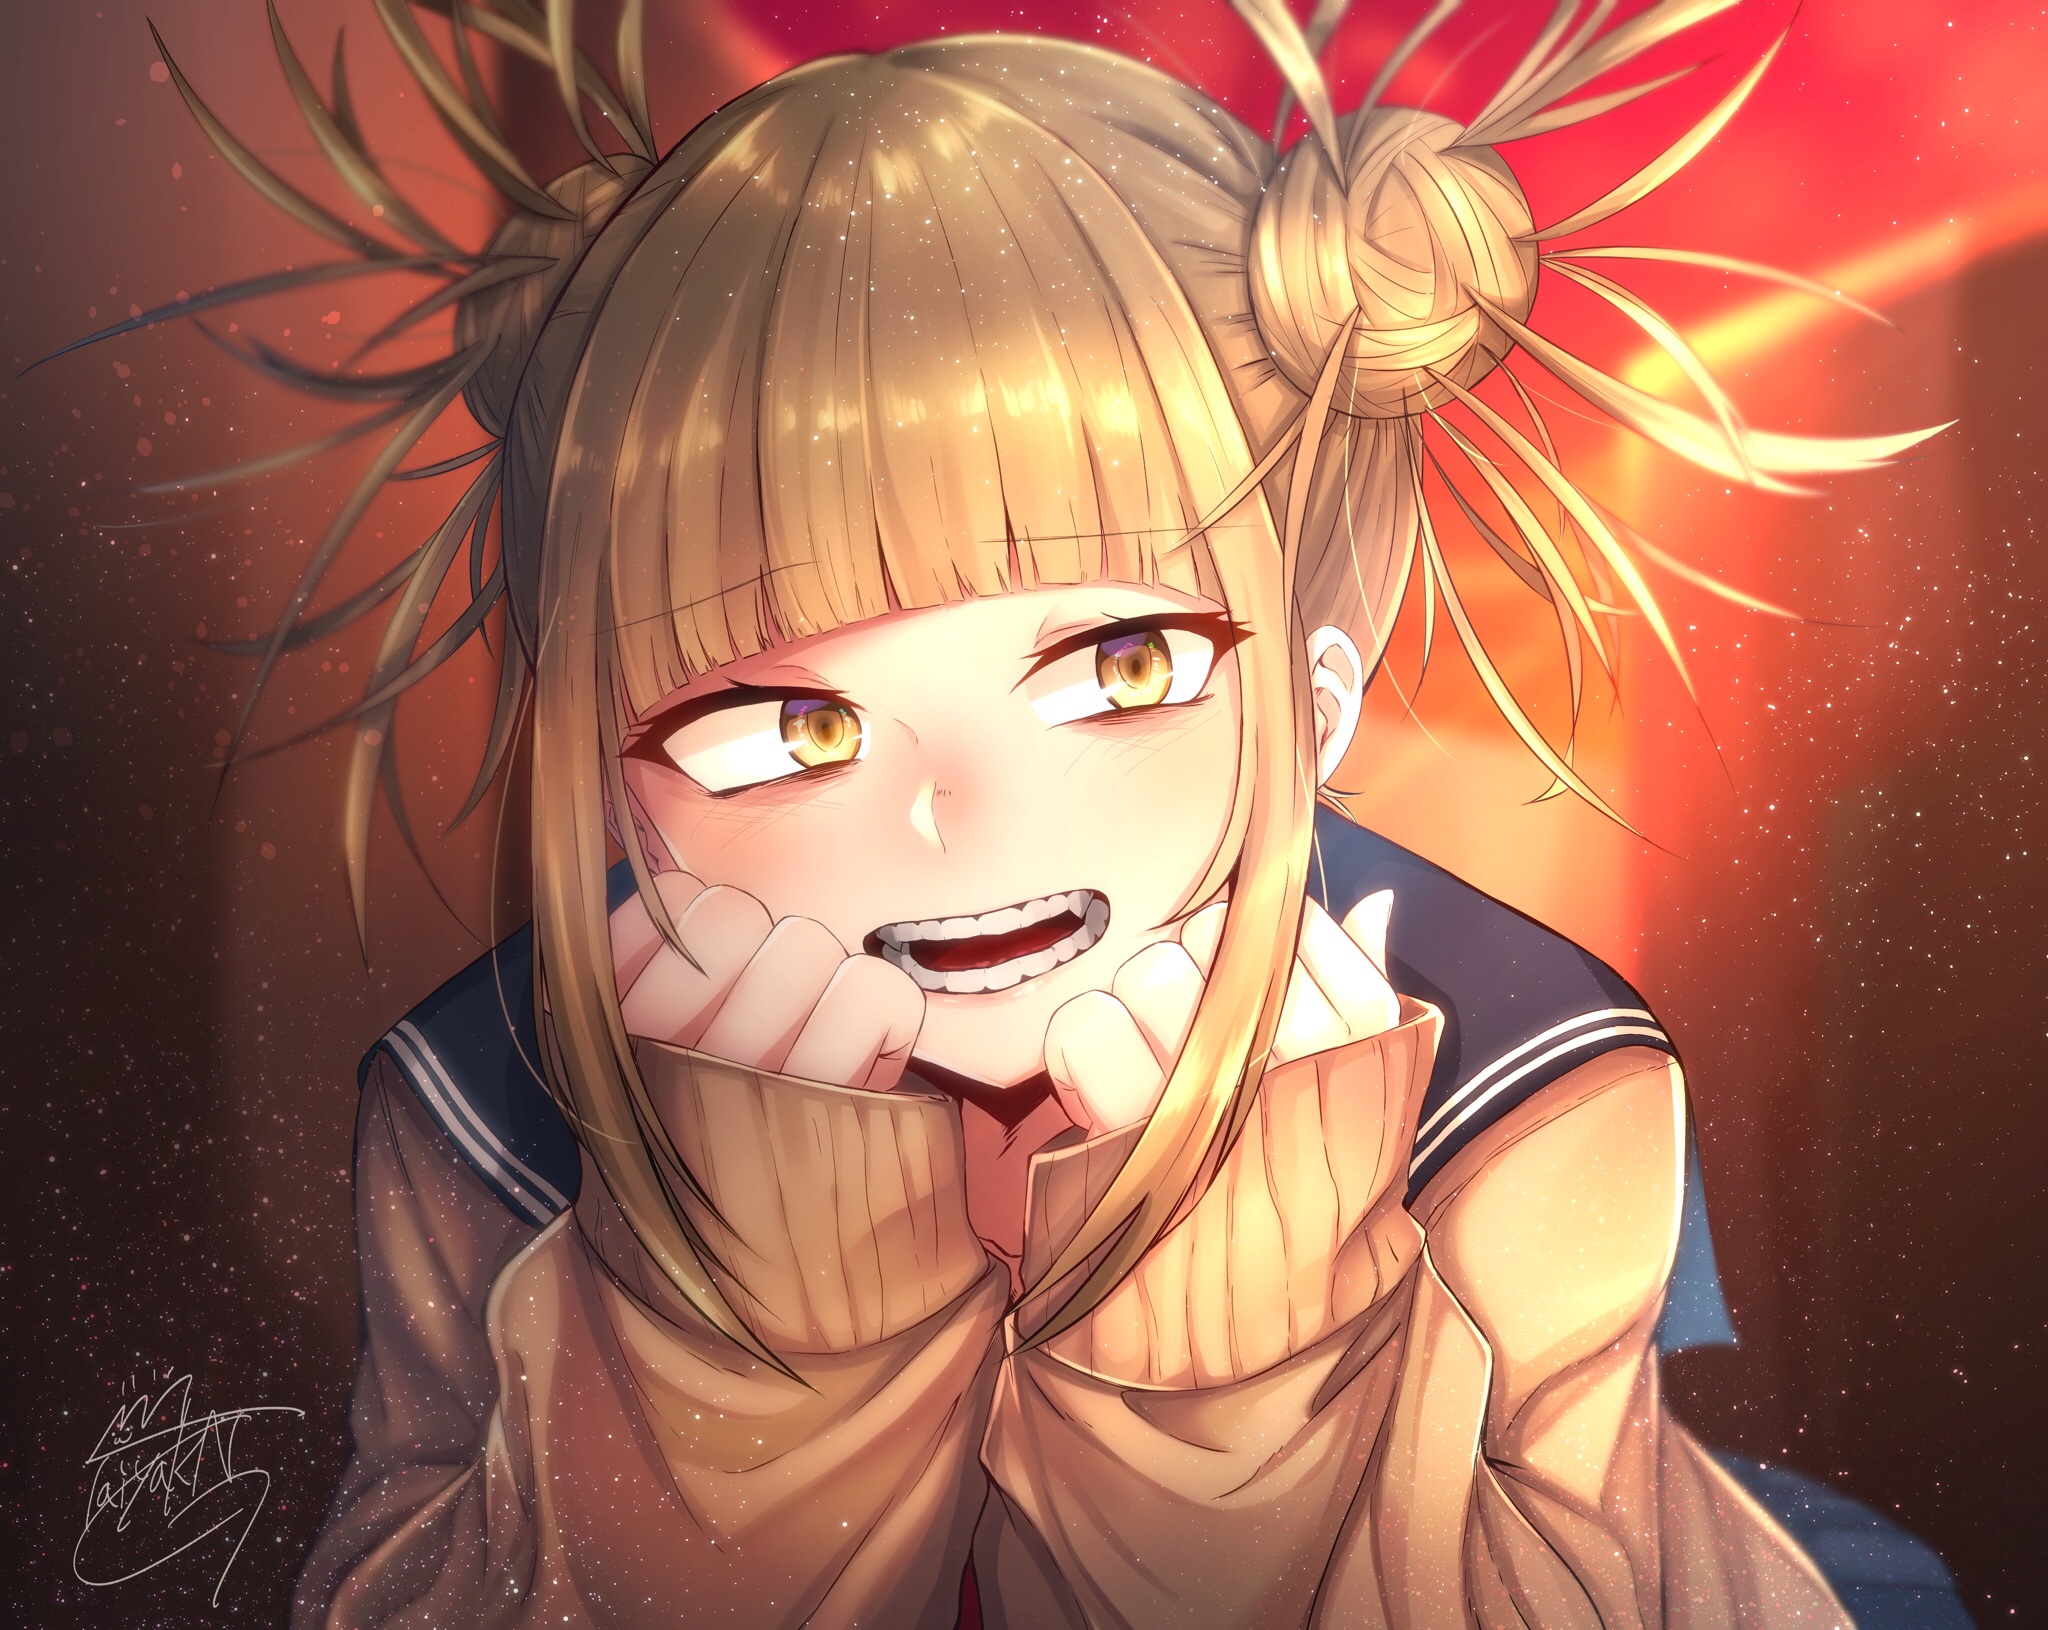 Himiko Toga in love by TaiyaKING